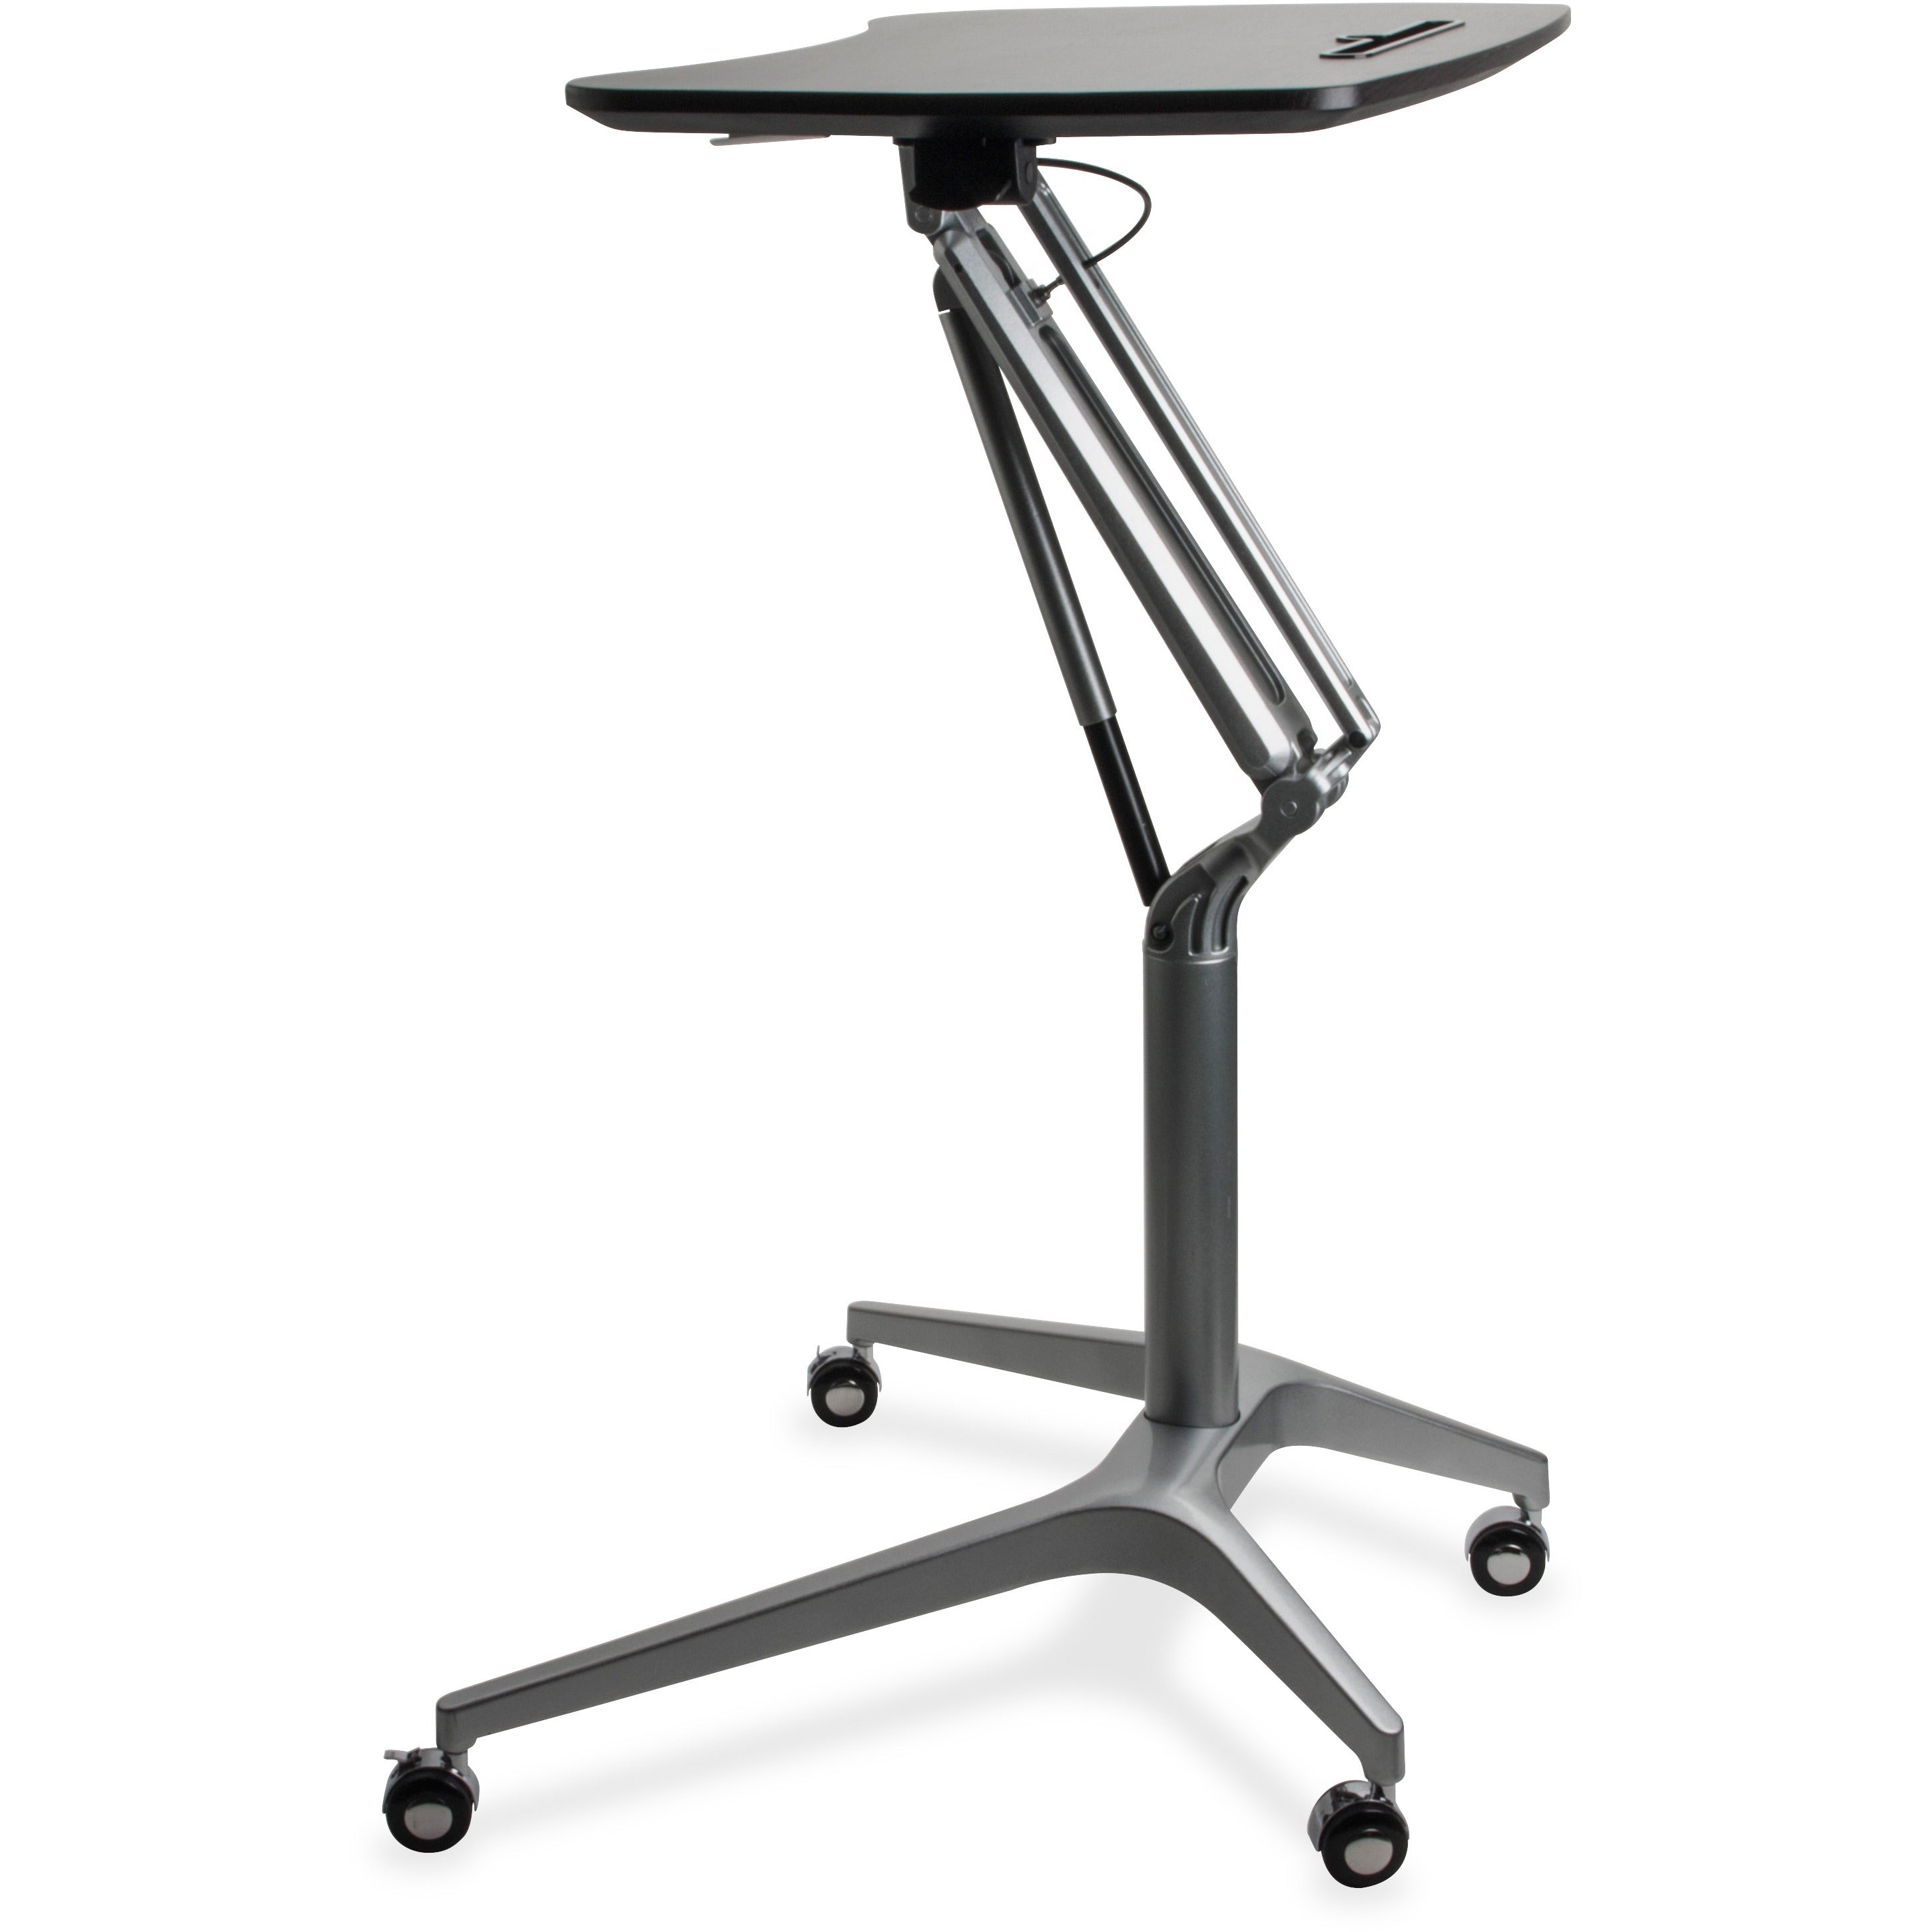 lorell-gas-lift-height-adjustable-mobile-desk-for-table-topblack-rectangle-top-powder-coated-base-adjustable-height-2870-to-4090-adjustment-x-2825-table-top-width-x-1875-table-top-depth-41-height-assembly-required-1-each_llr84838 - 3